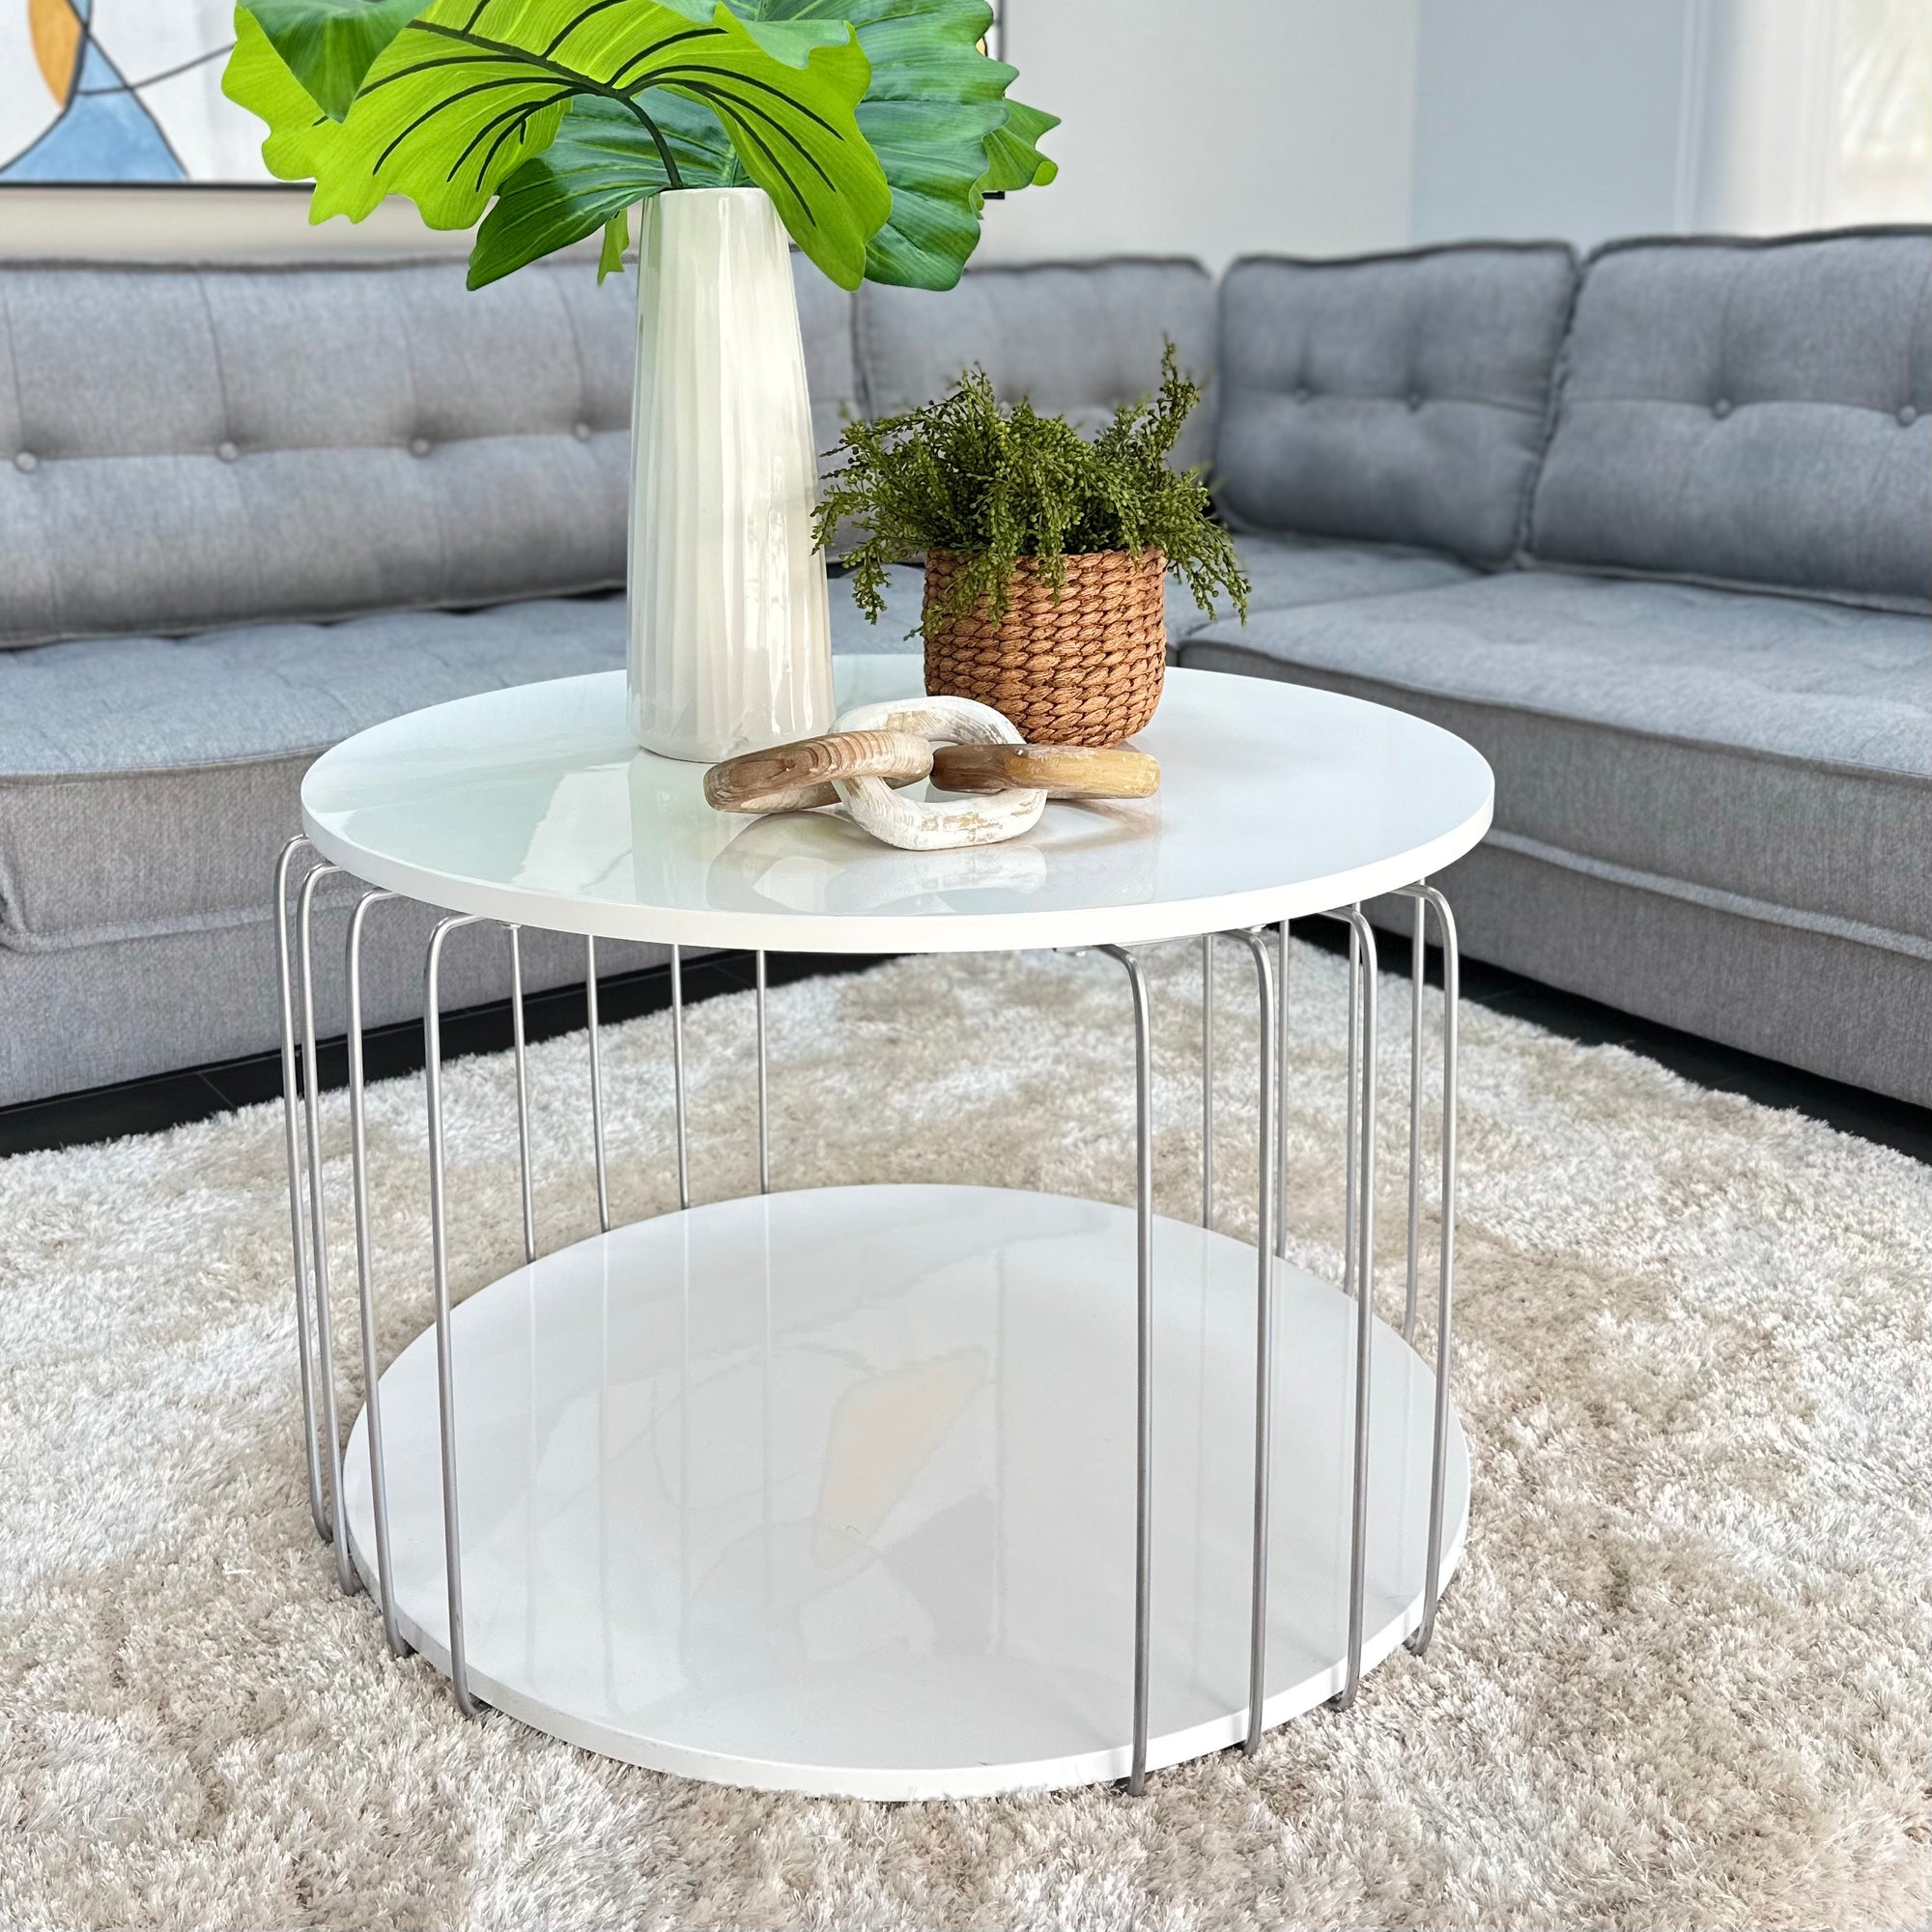 Alisa Lacquer White Round Coffee Table